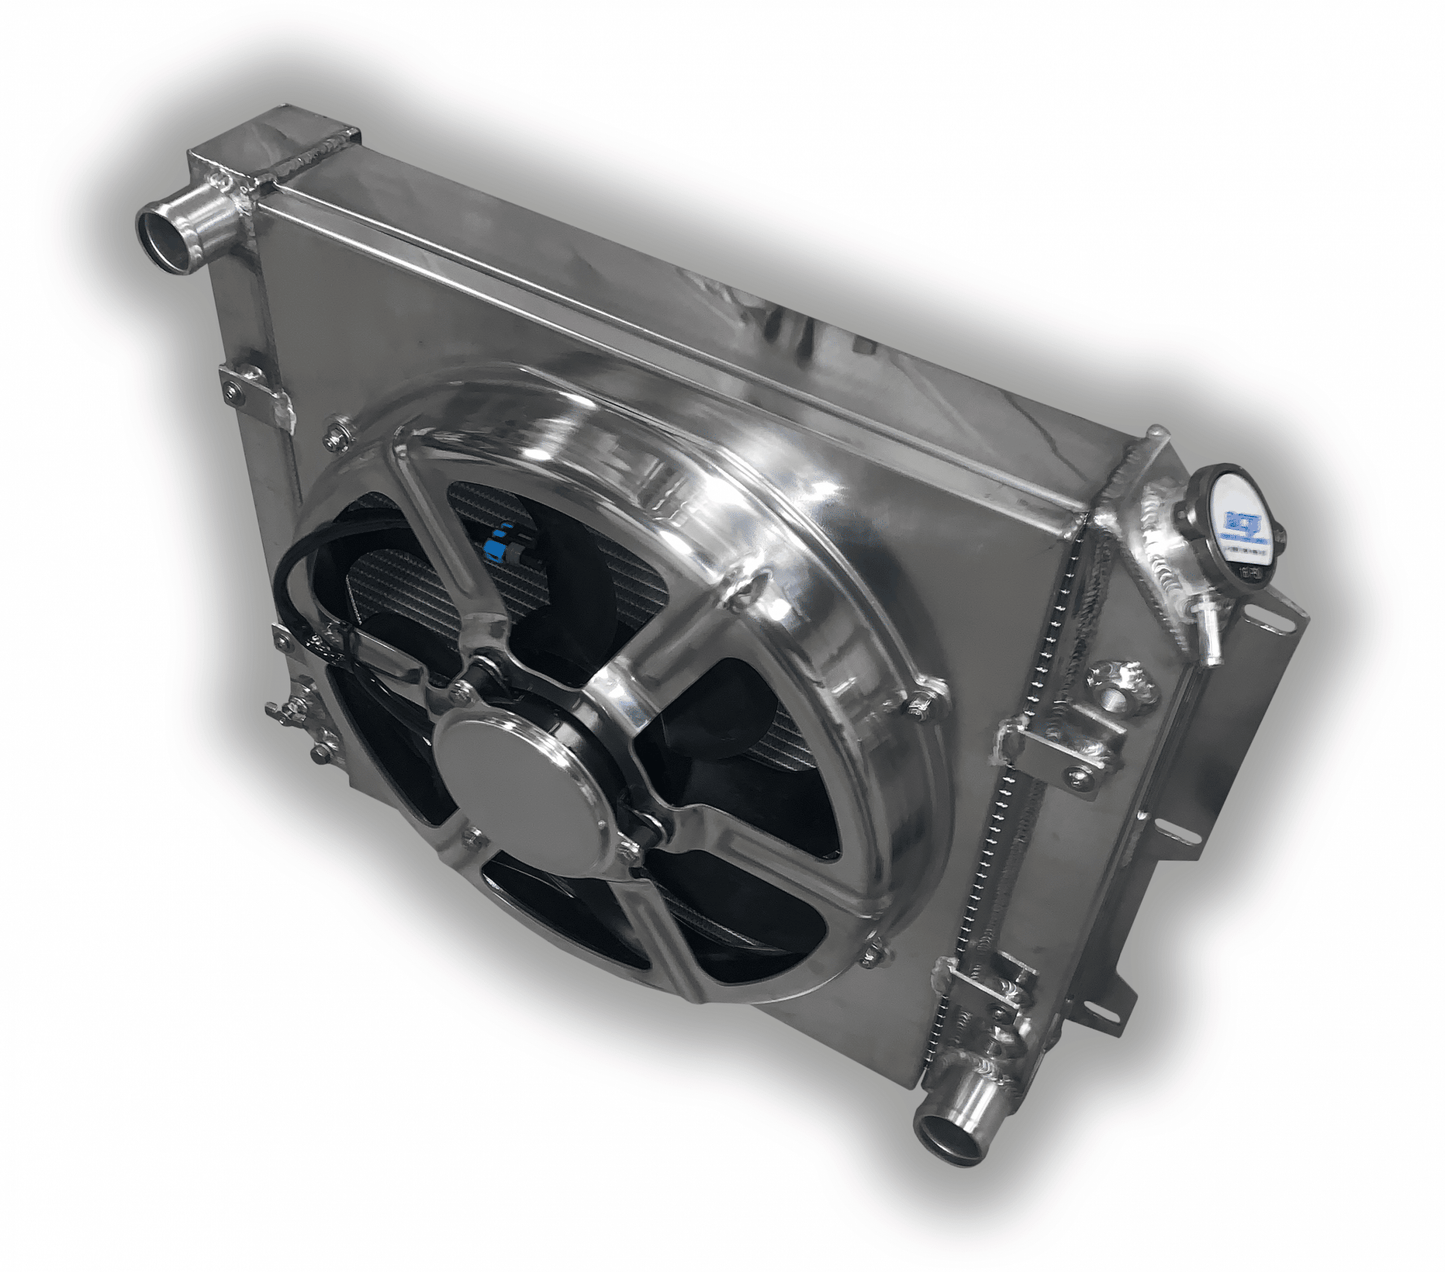 Jeep TJ 1987 - 2004 Aluminum Radiator For Small Block Chevy Conversion - 16" 3000 CFM HPX FAN